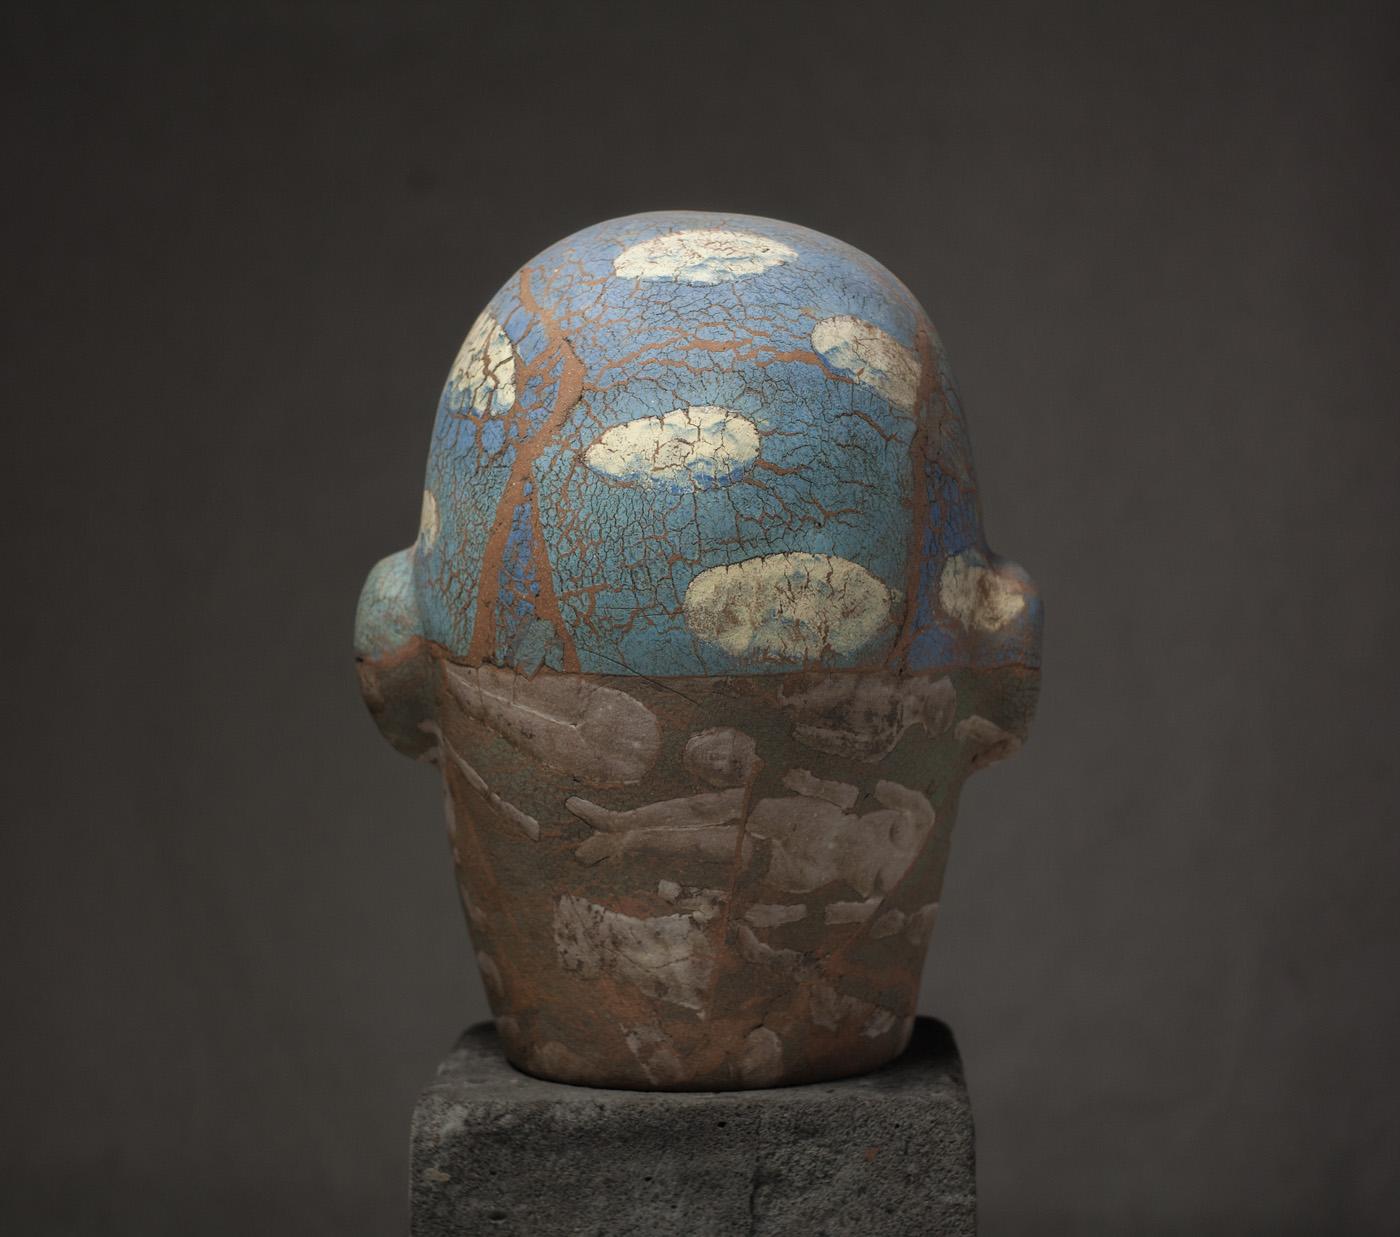 Head In The Couds - Contemporary Sculpture by Oleksandr Miroshnychenko